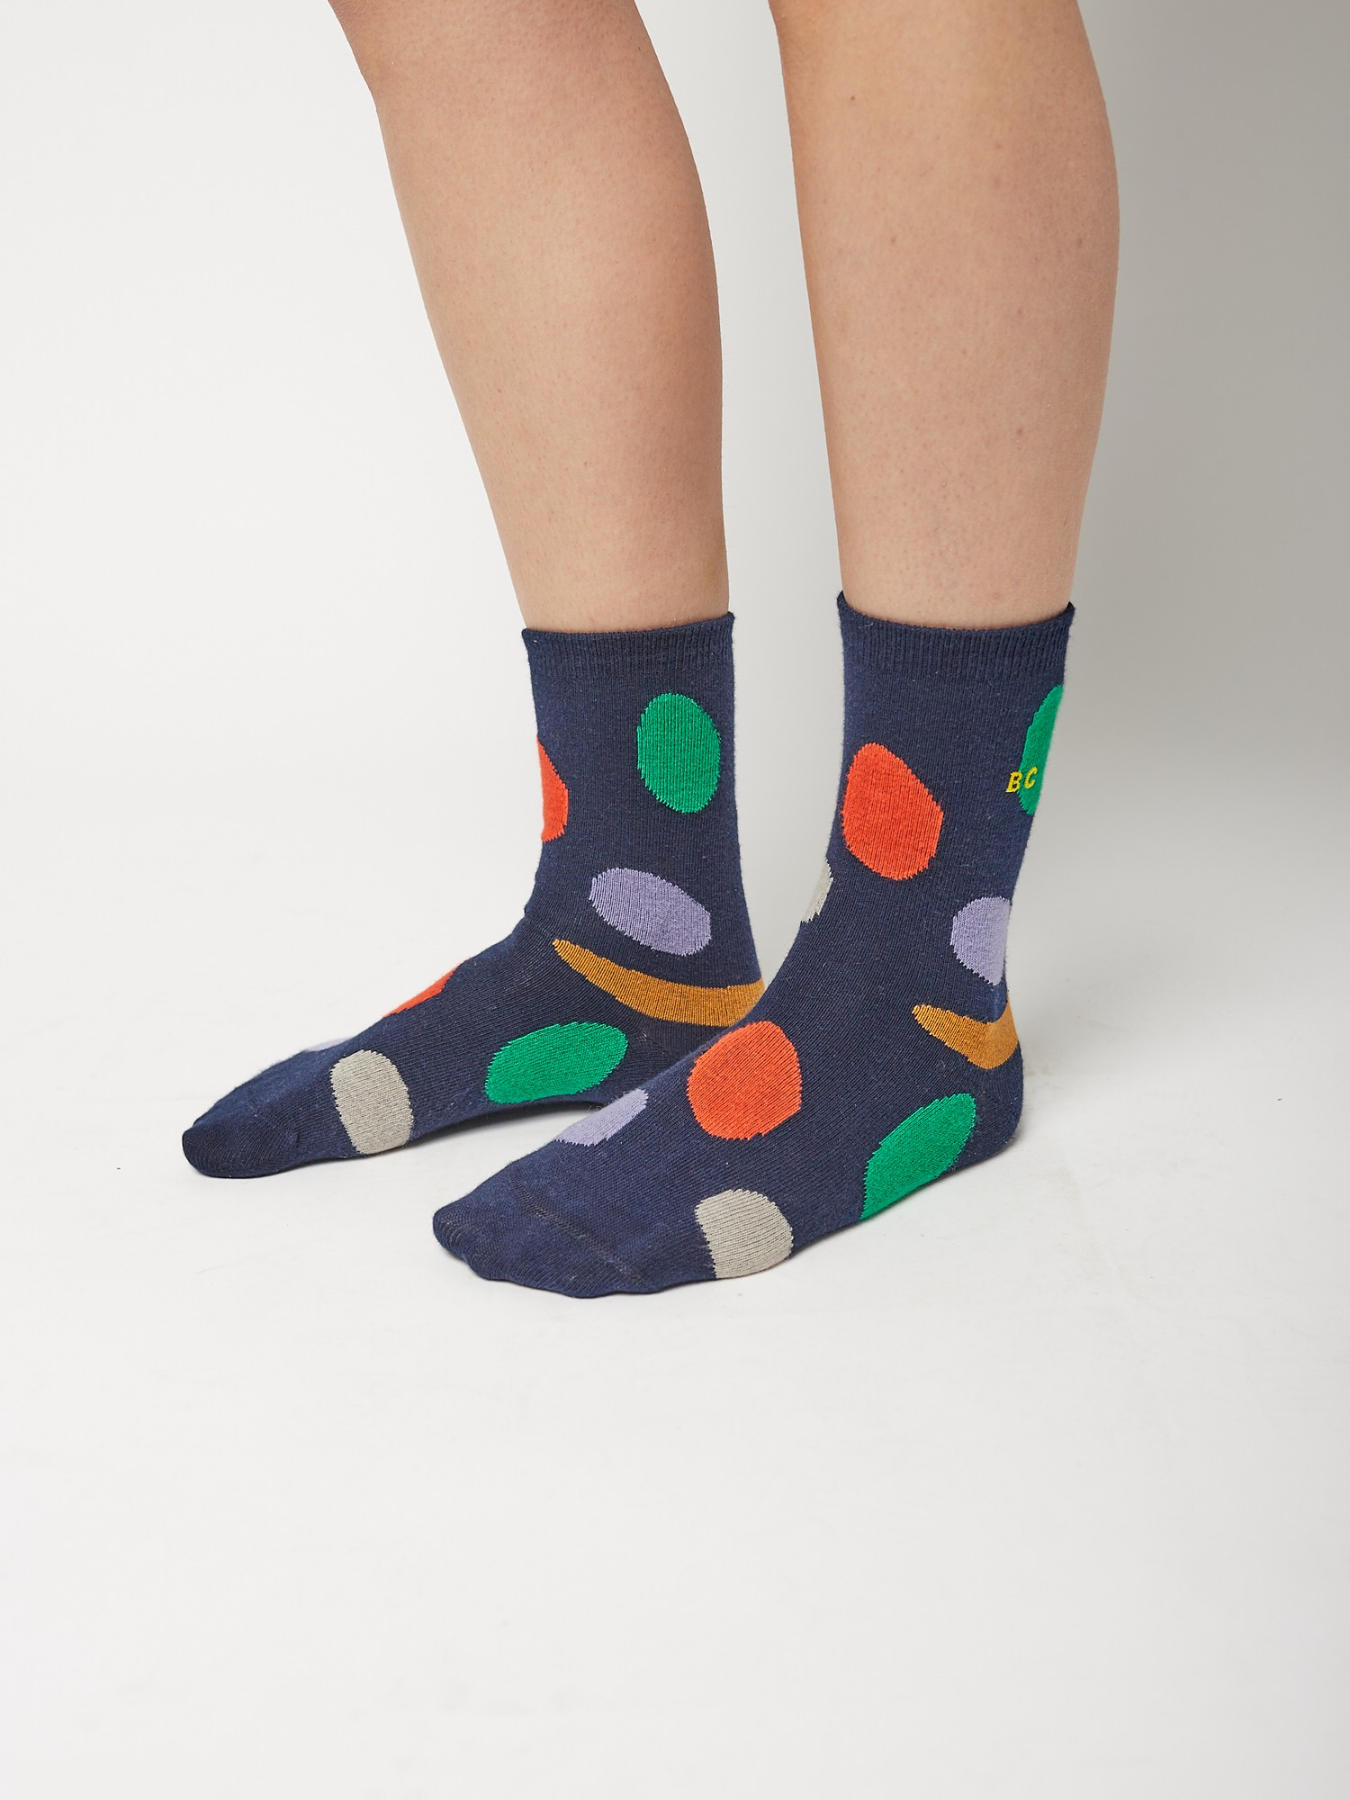 Bobo Choses - THE PARTY SOCKS Pack of 3 6